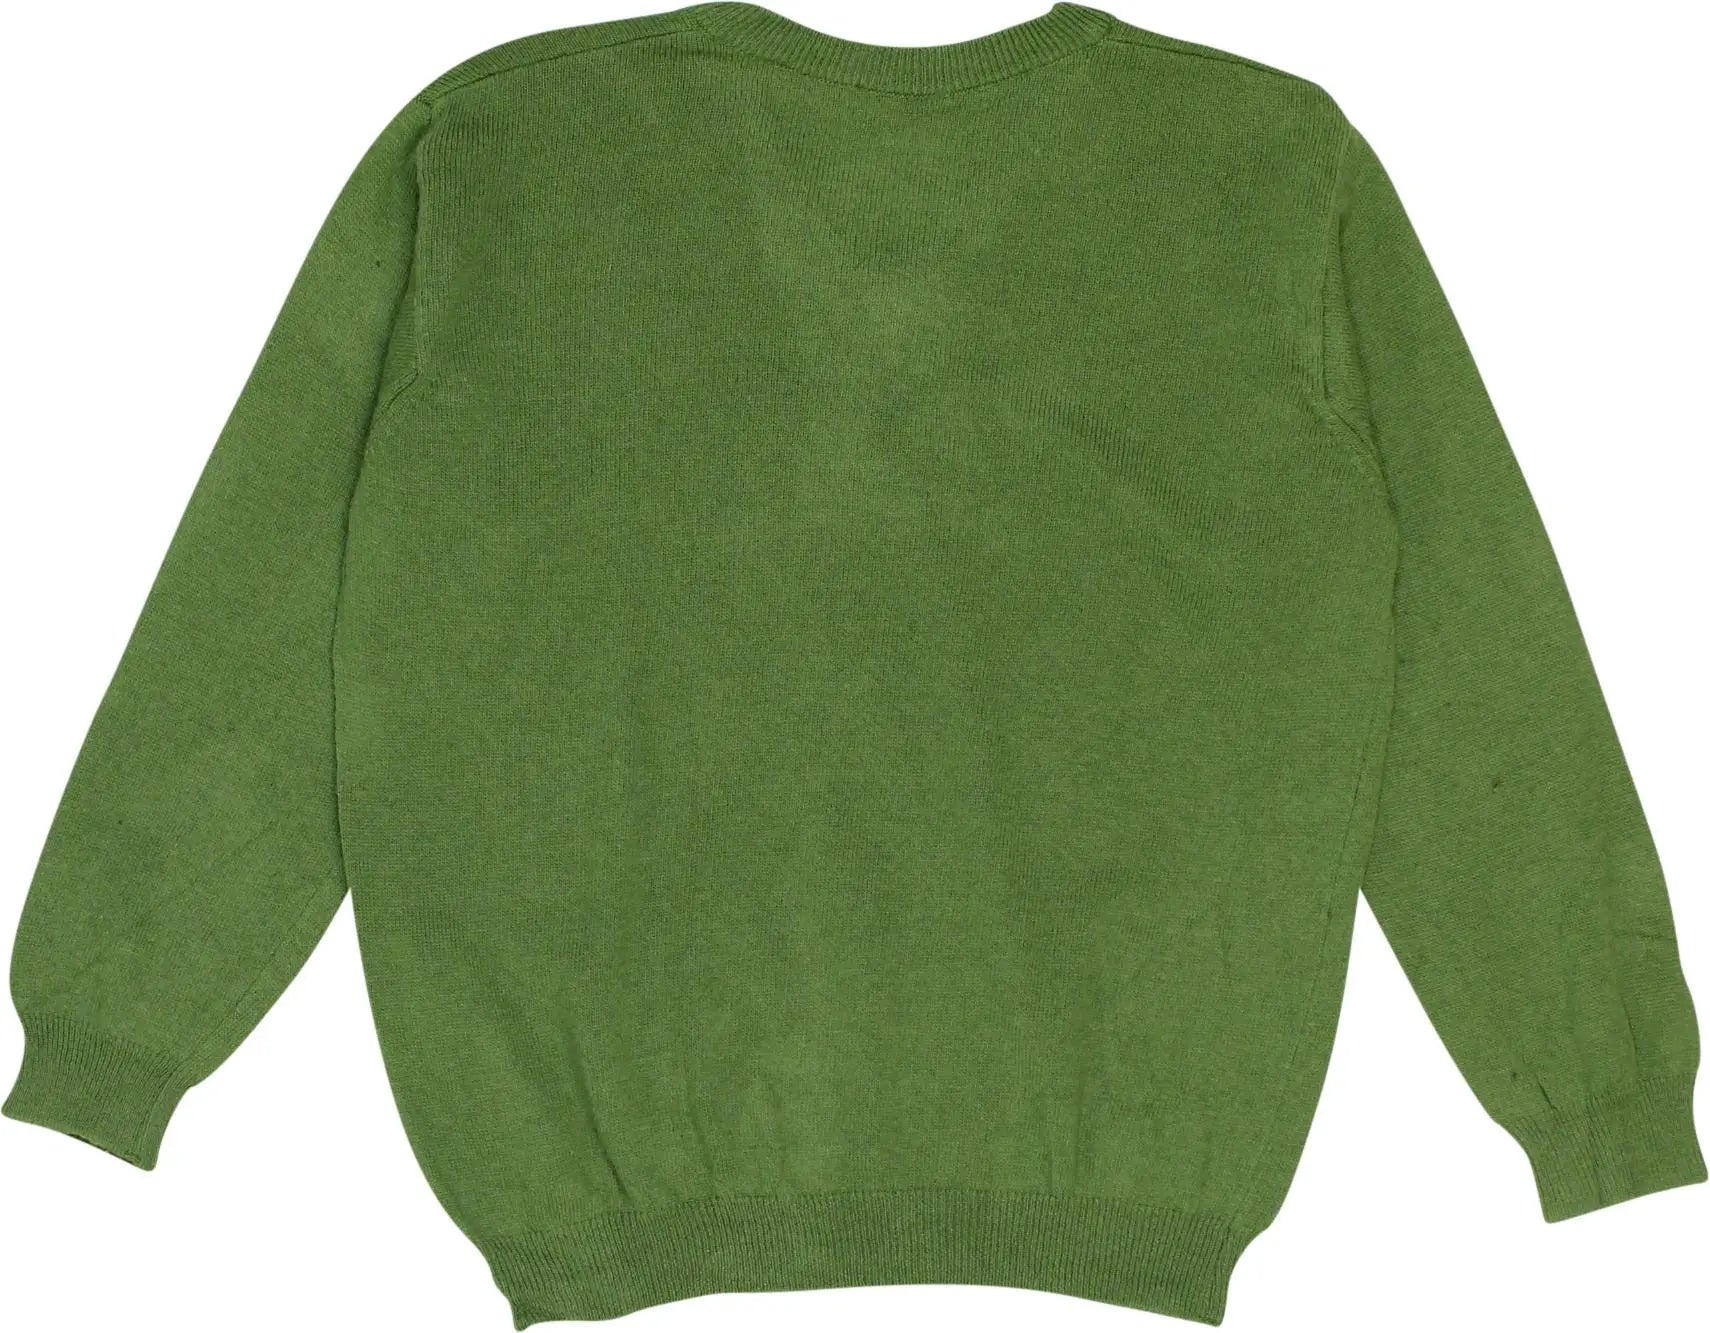 United Colors of Benetton - Green Wool Blend Sweater- ThriftTale.com - Vintage and second handclothing